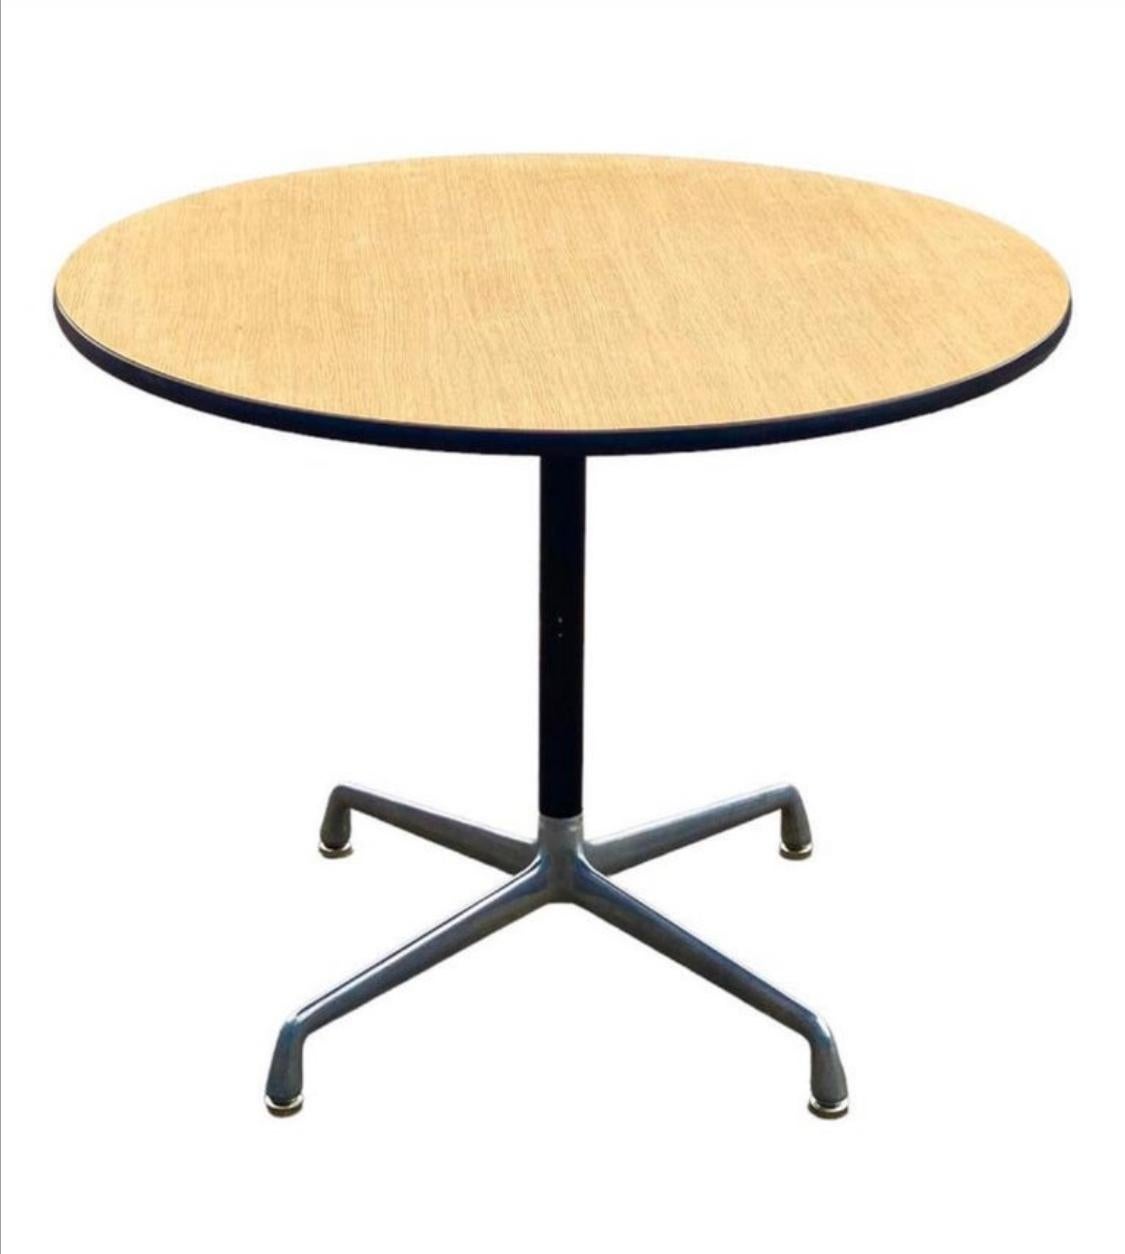 Beautiful and efficient dining table designed by Charles and Ray Eames and manufactured by Herman Miller. Model ET 102. Executed with polished aluminum base and wood grain laminate top. Table surface is extremely durable and moisture/stain